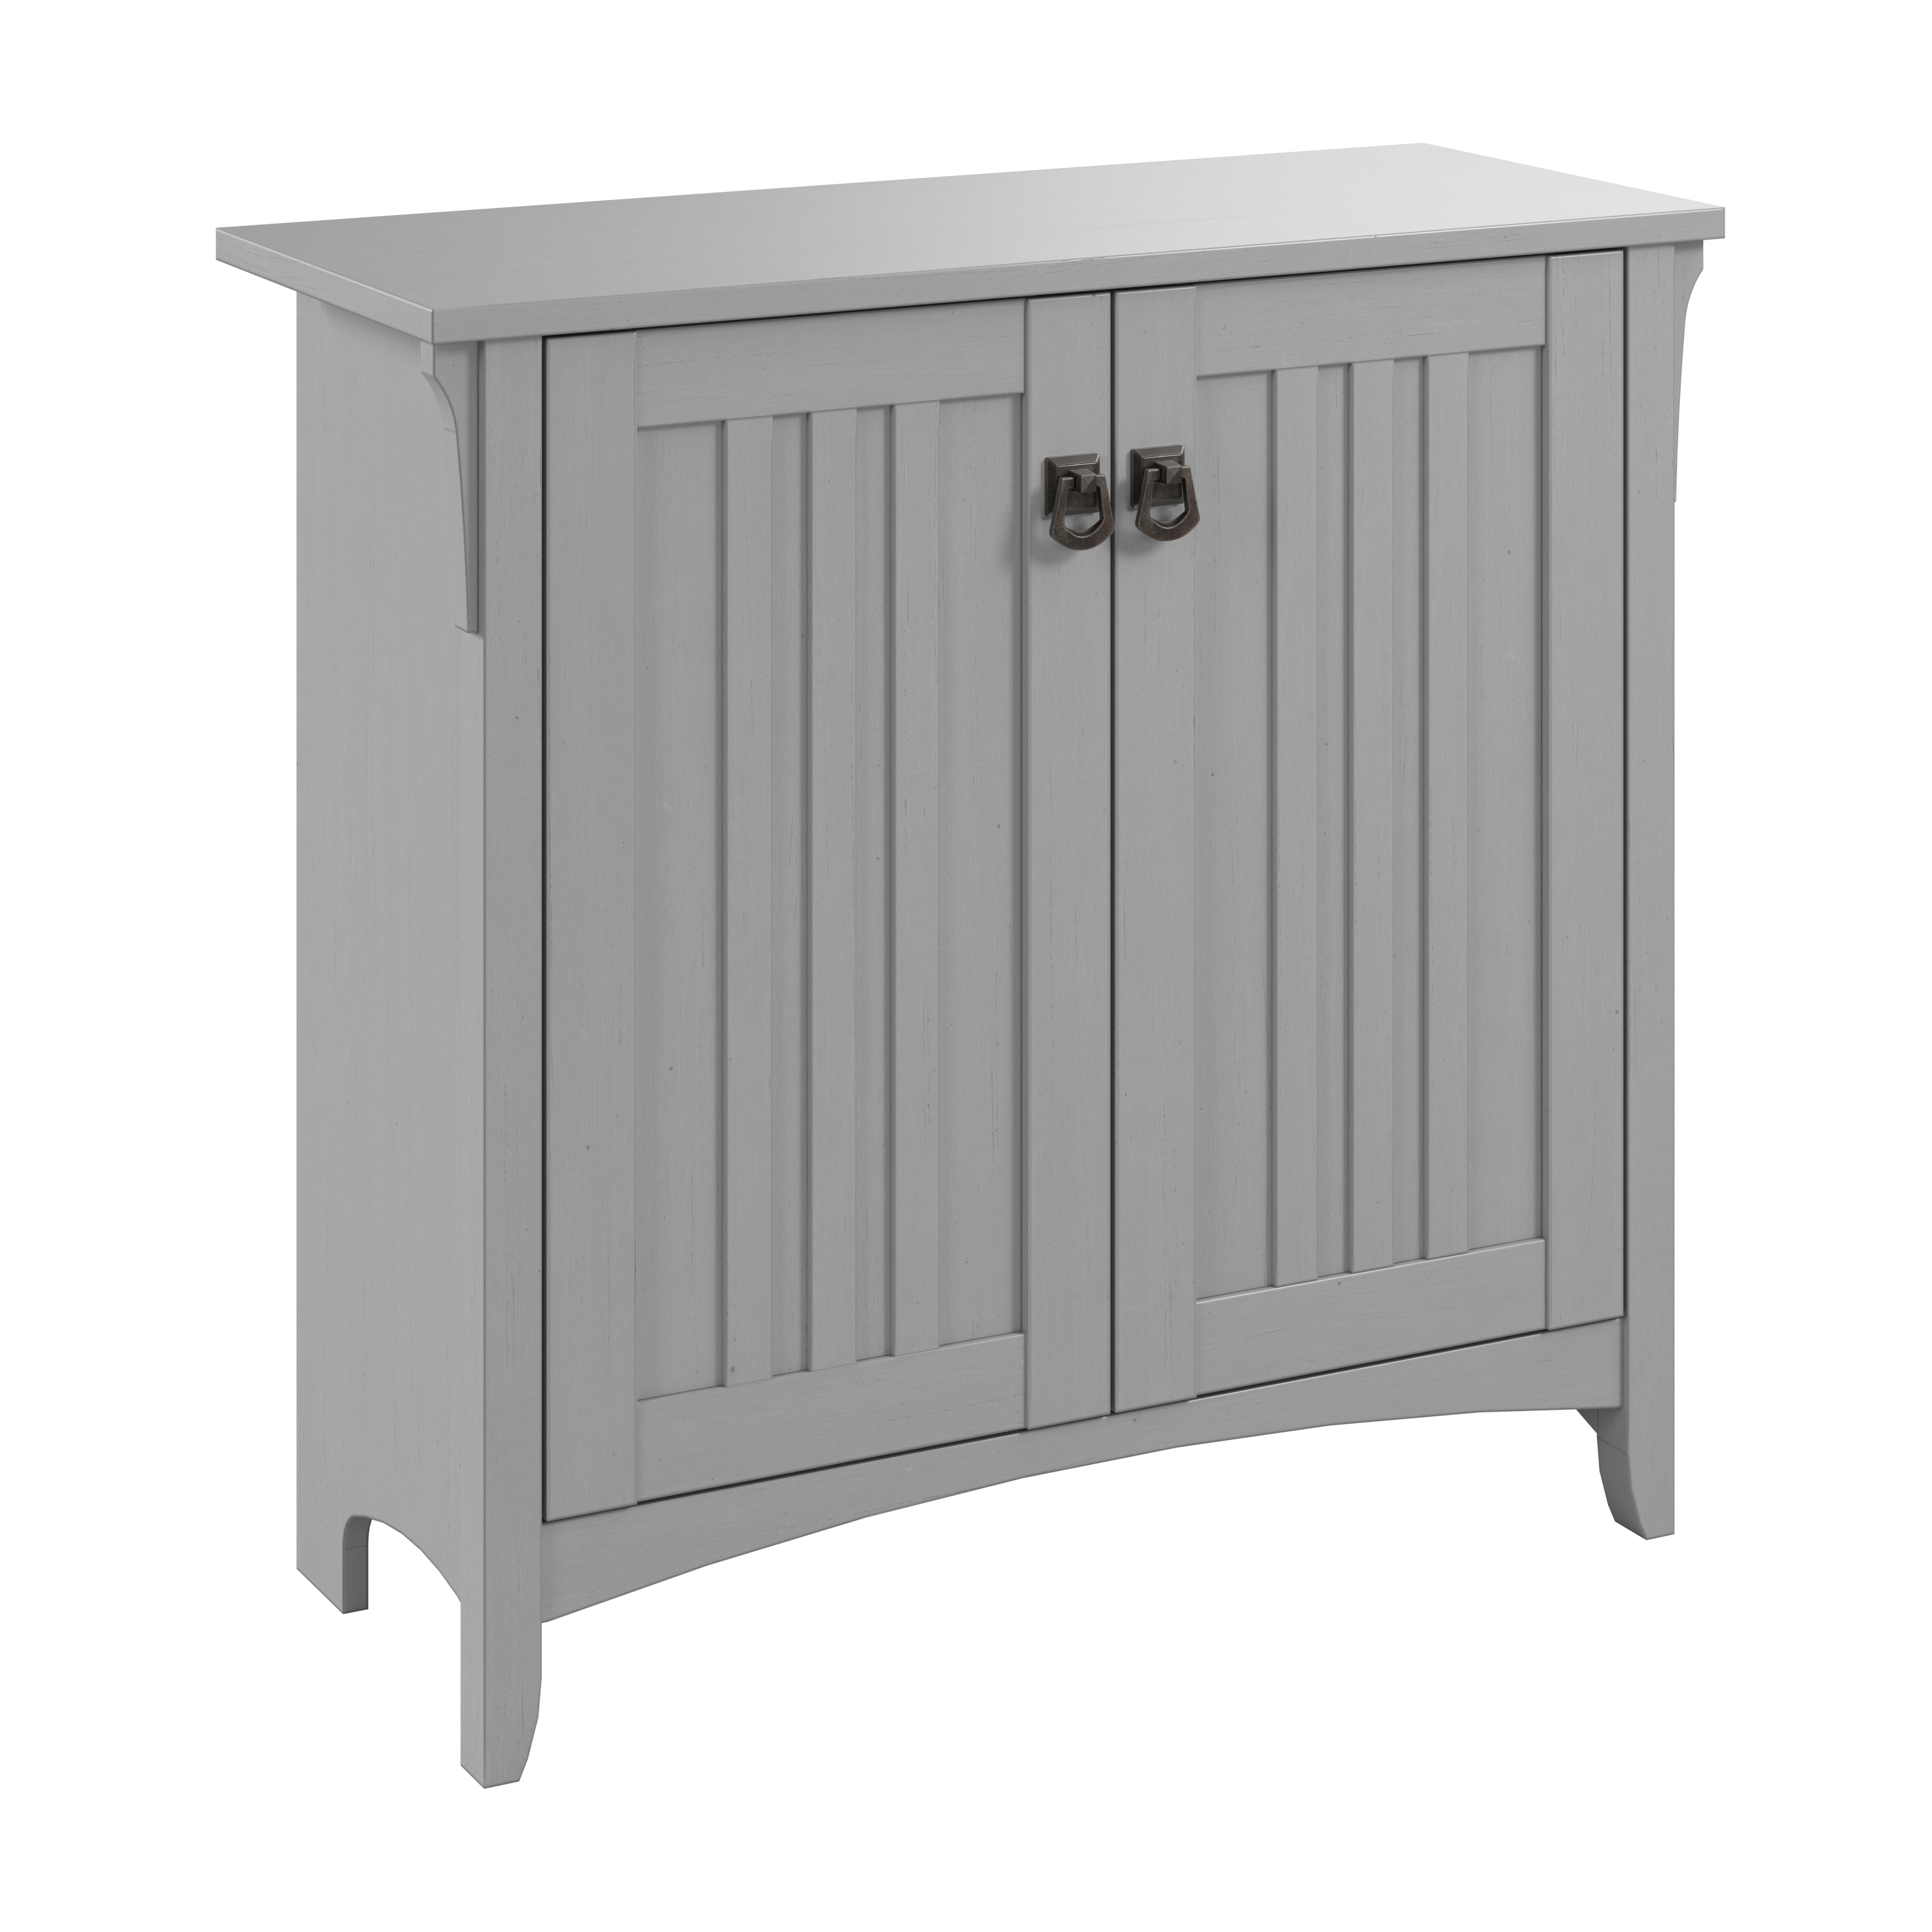 Shop Bush Furniture Salinas Small Storage Cabinet with Doors and Shelves 02 SAS632CG-03 #color_cape cod gray